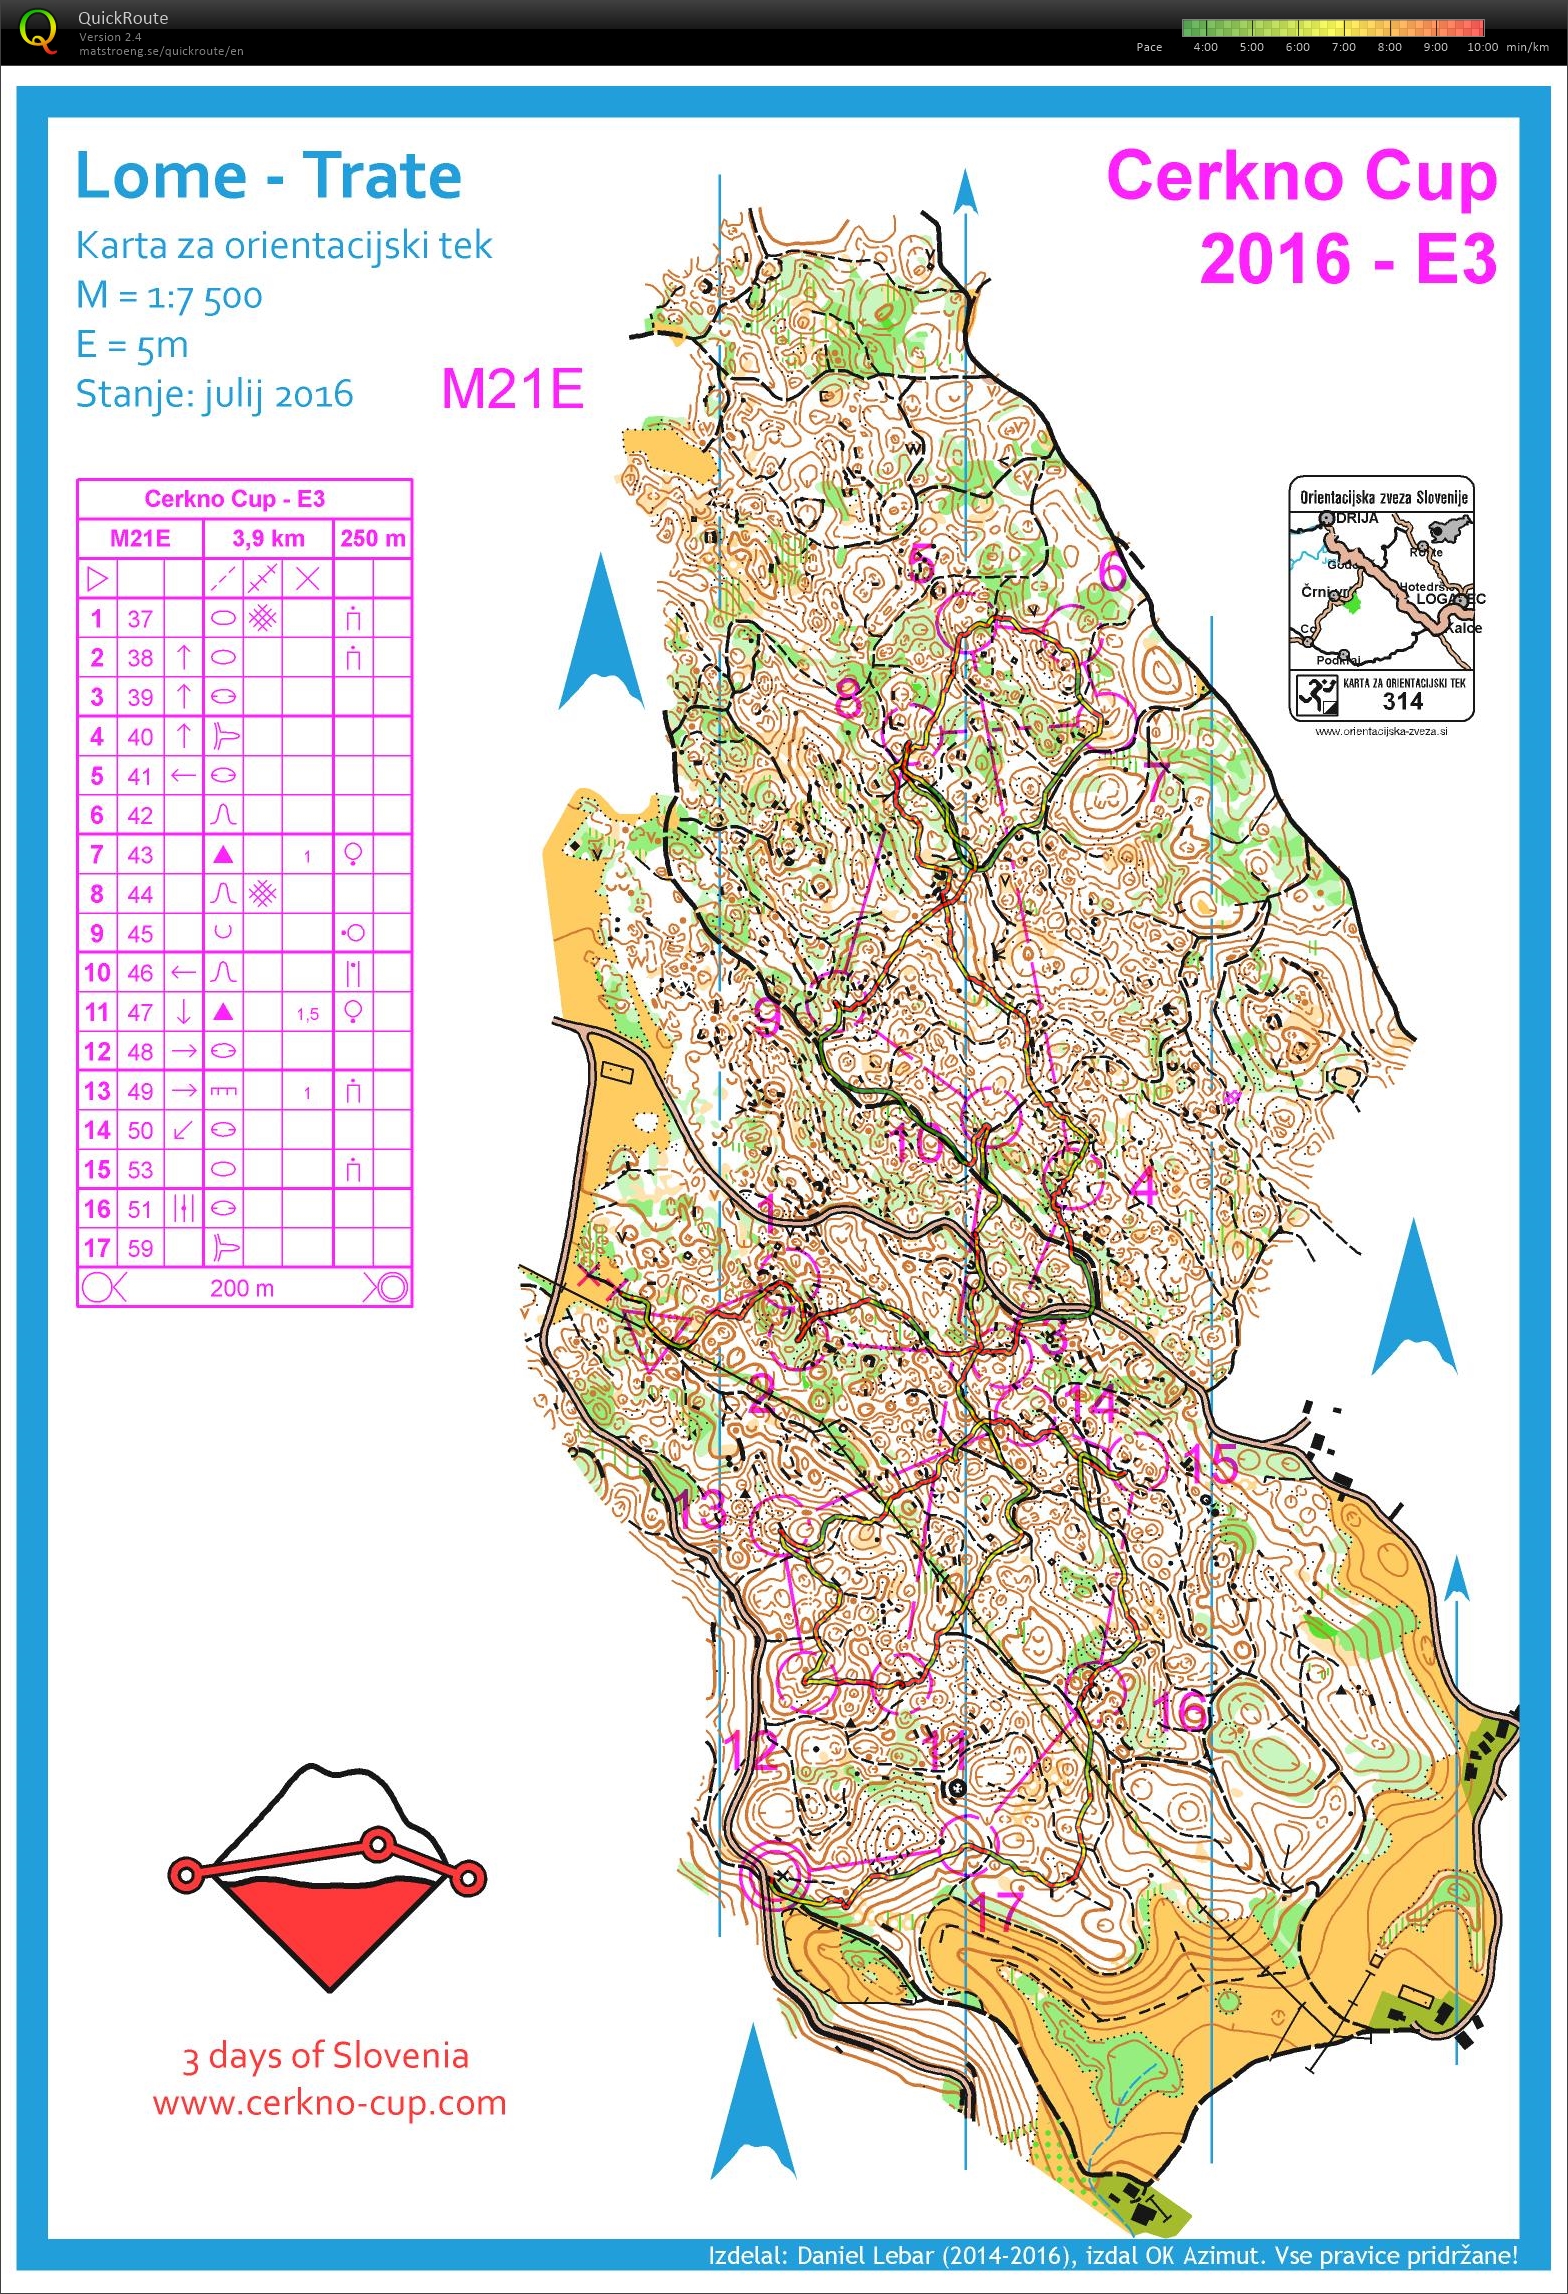 Cerkno Cup stage 3 (24/07/2016)